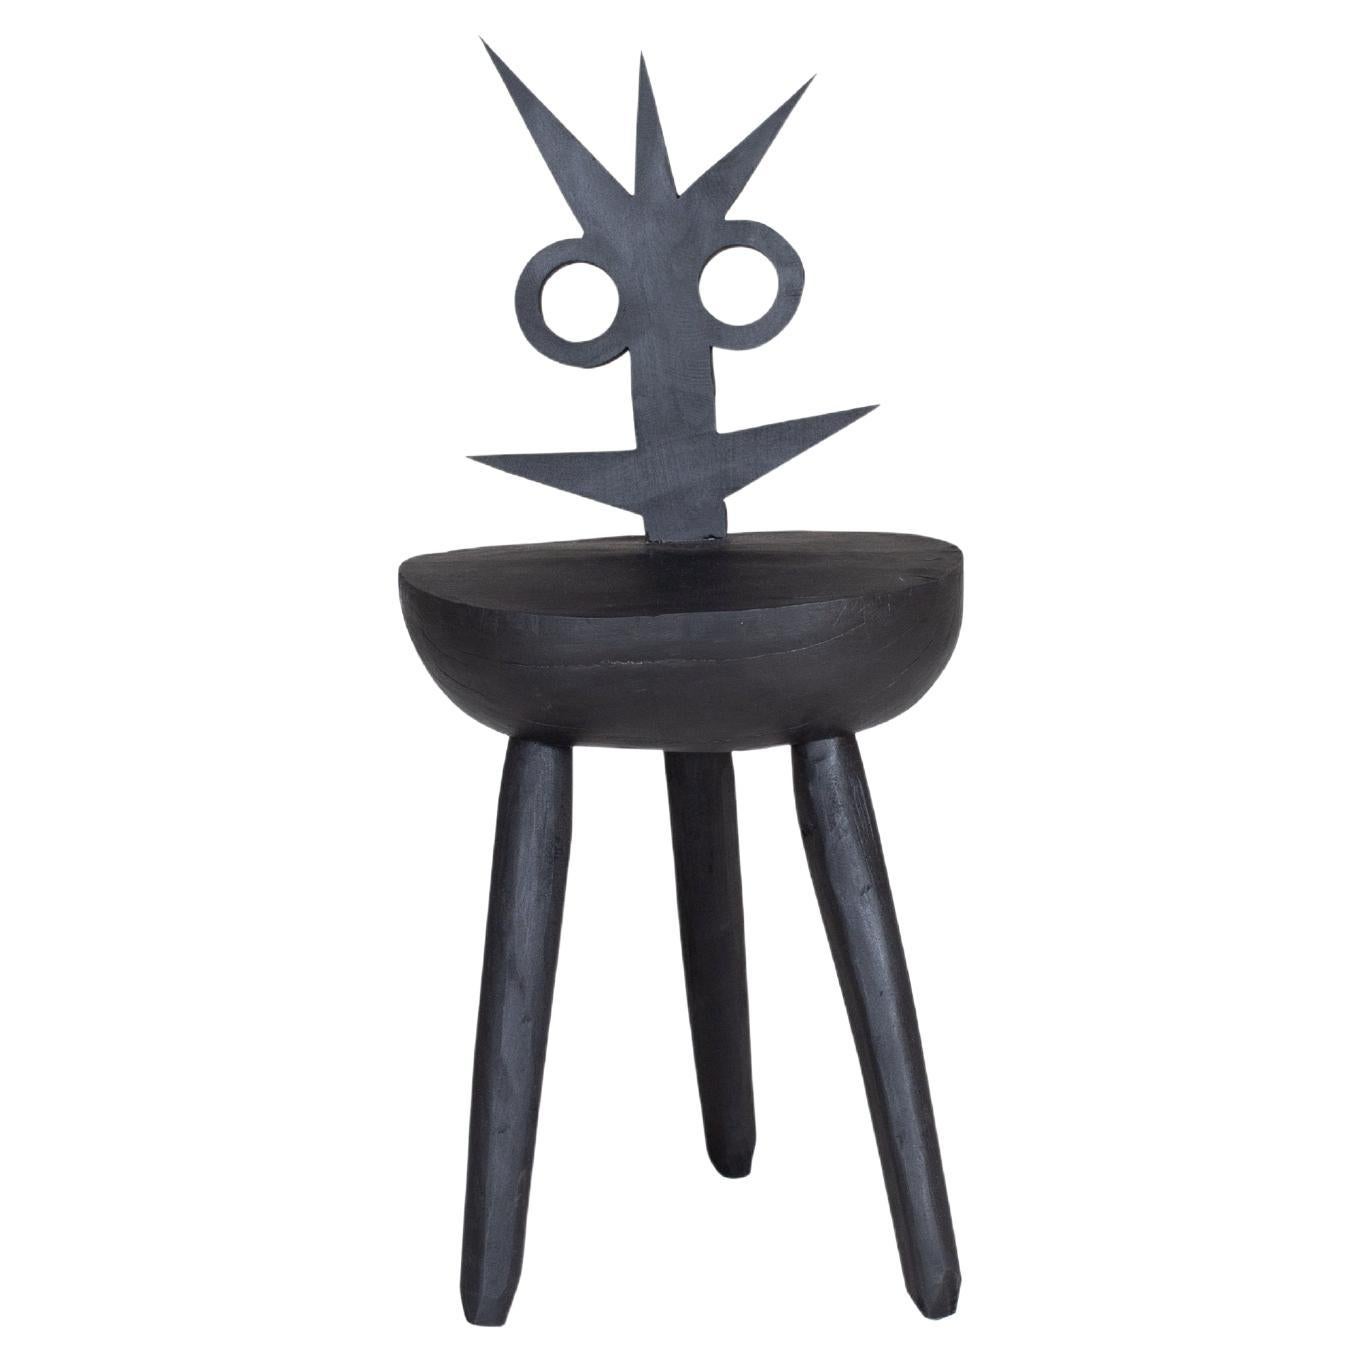 Lumpy Black Chair by Pulpo